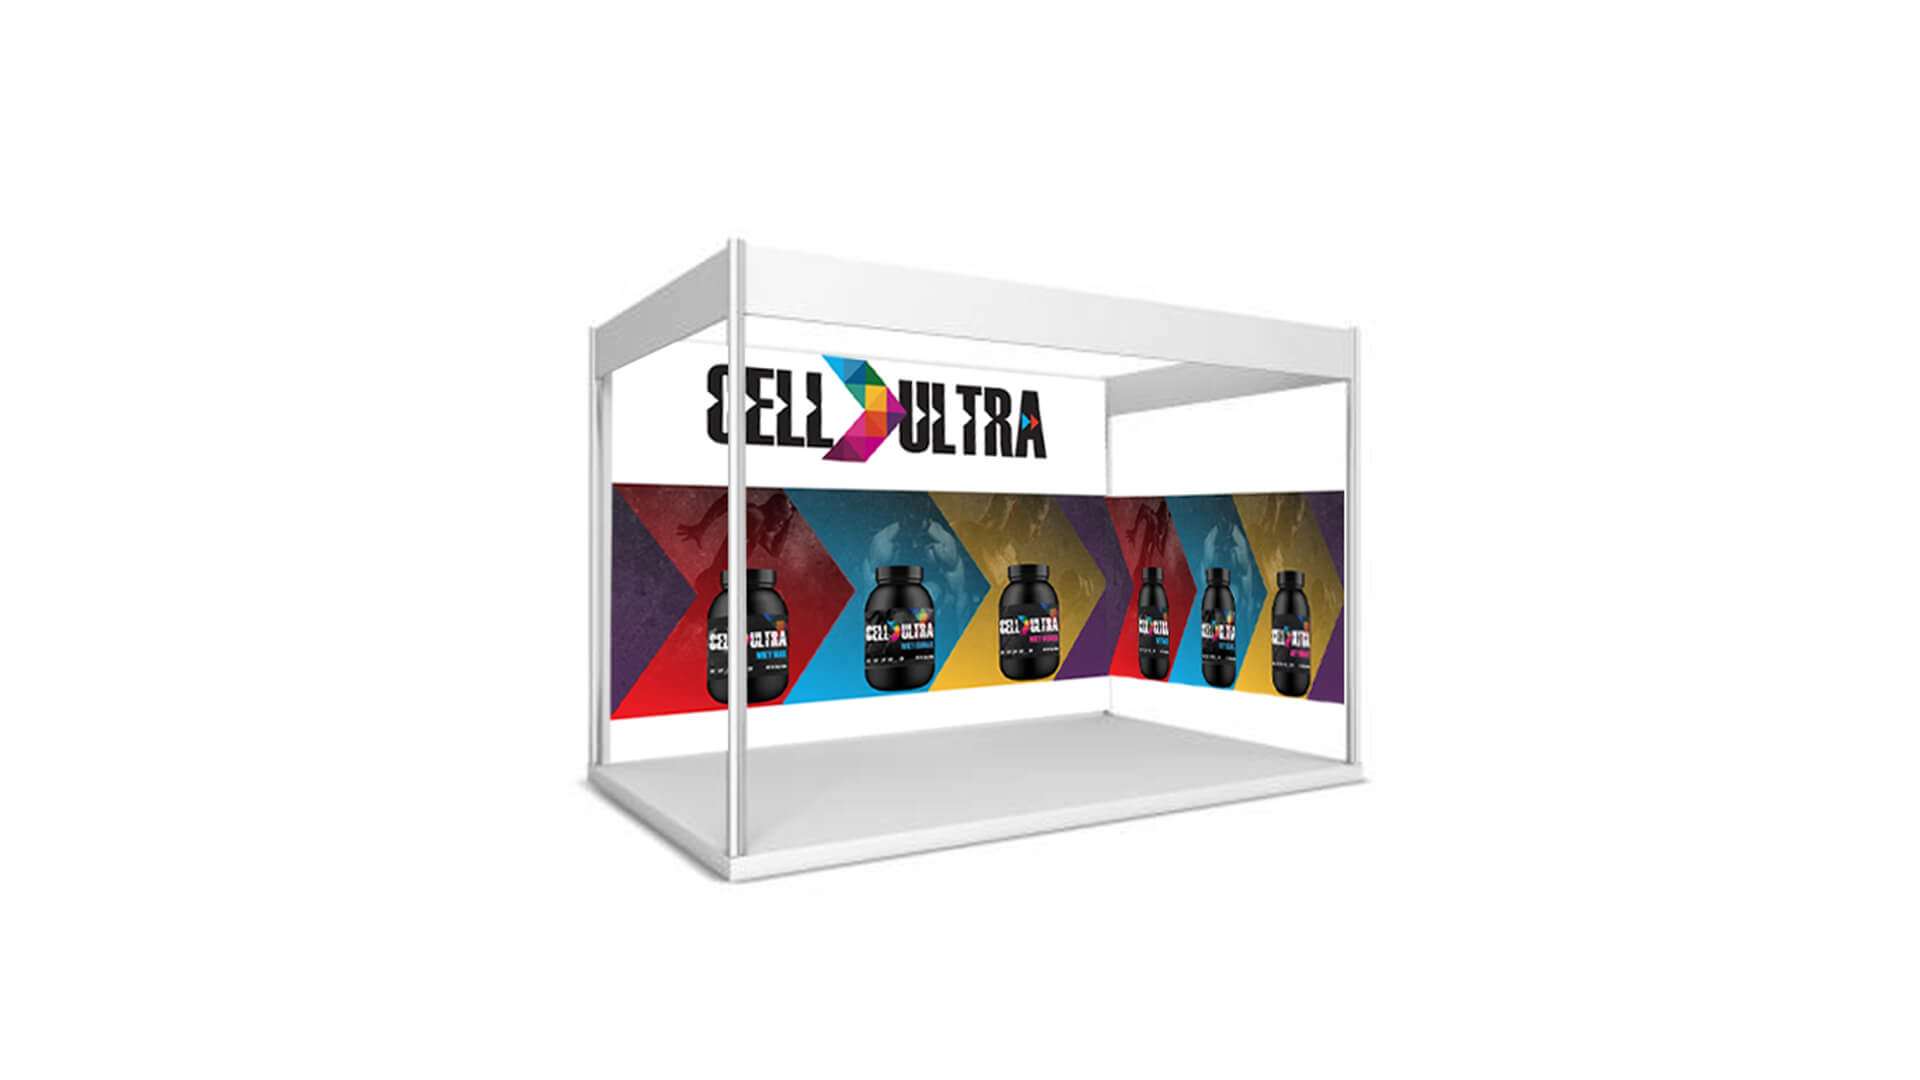 Conference Branding and Event Stall Designing Work of Cell Ultra
